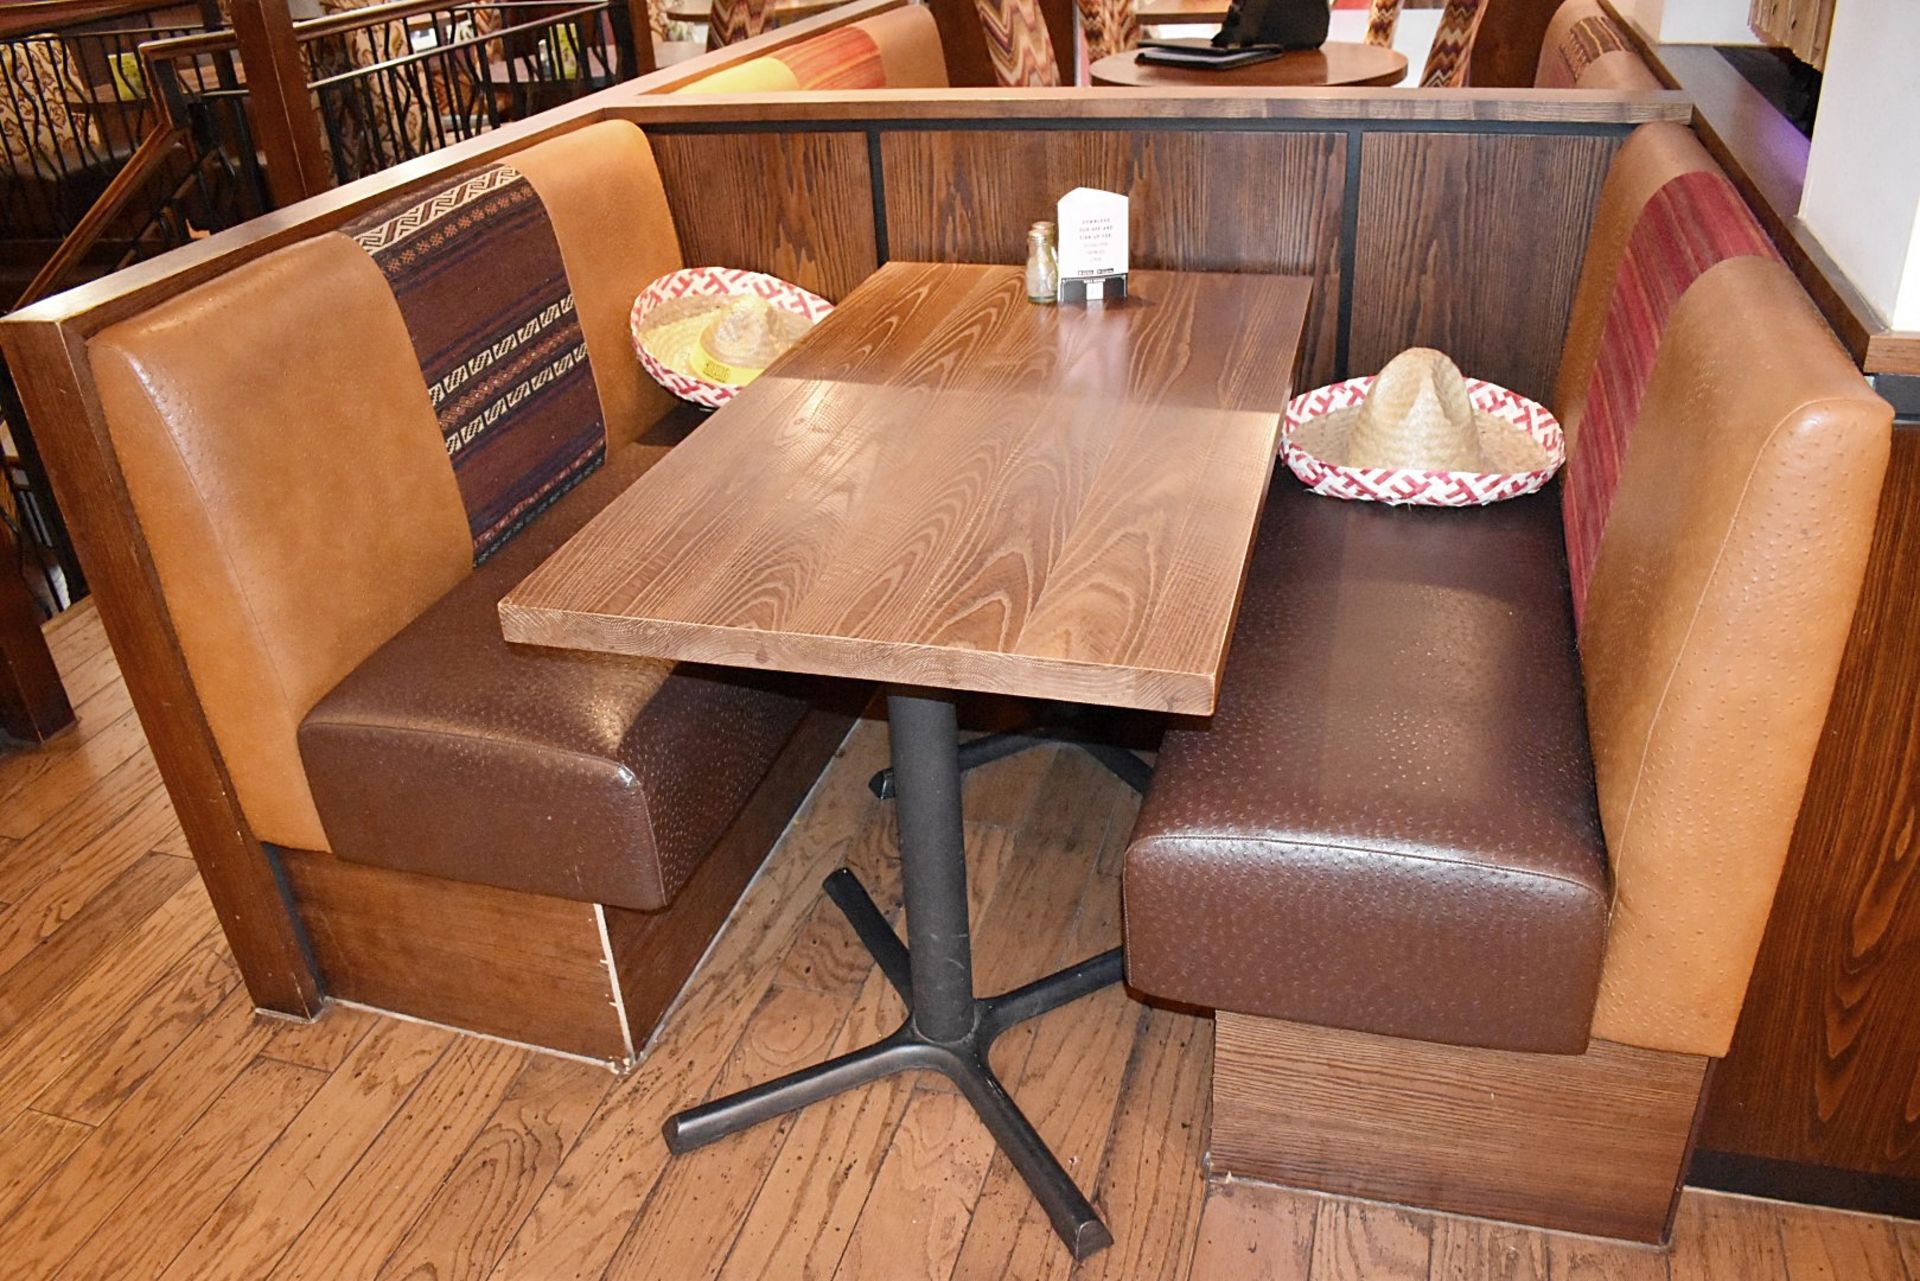 15-Pieces Of Restaurant Booth Seating Of Varying Length - Image 5 of 22